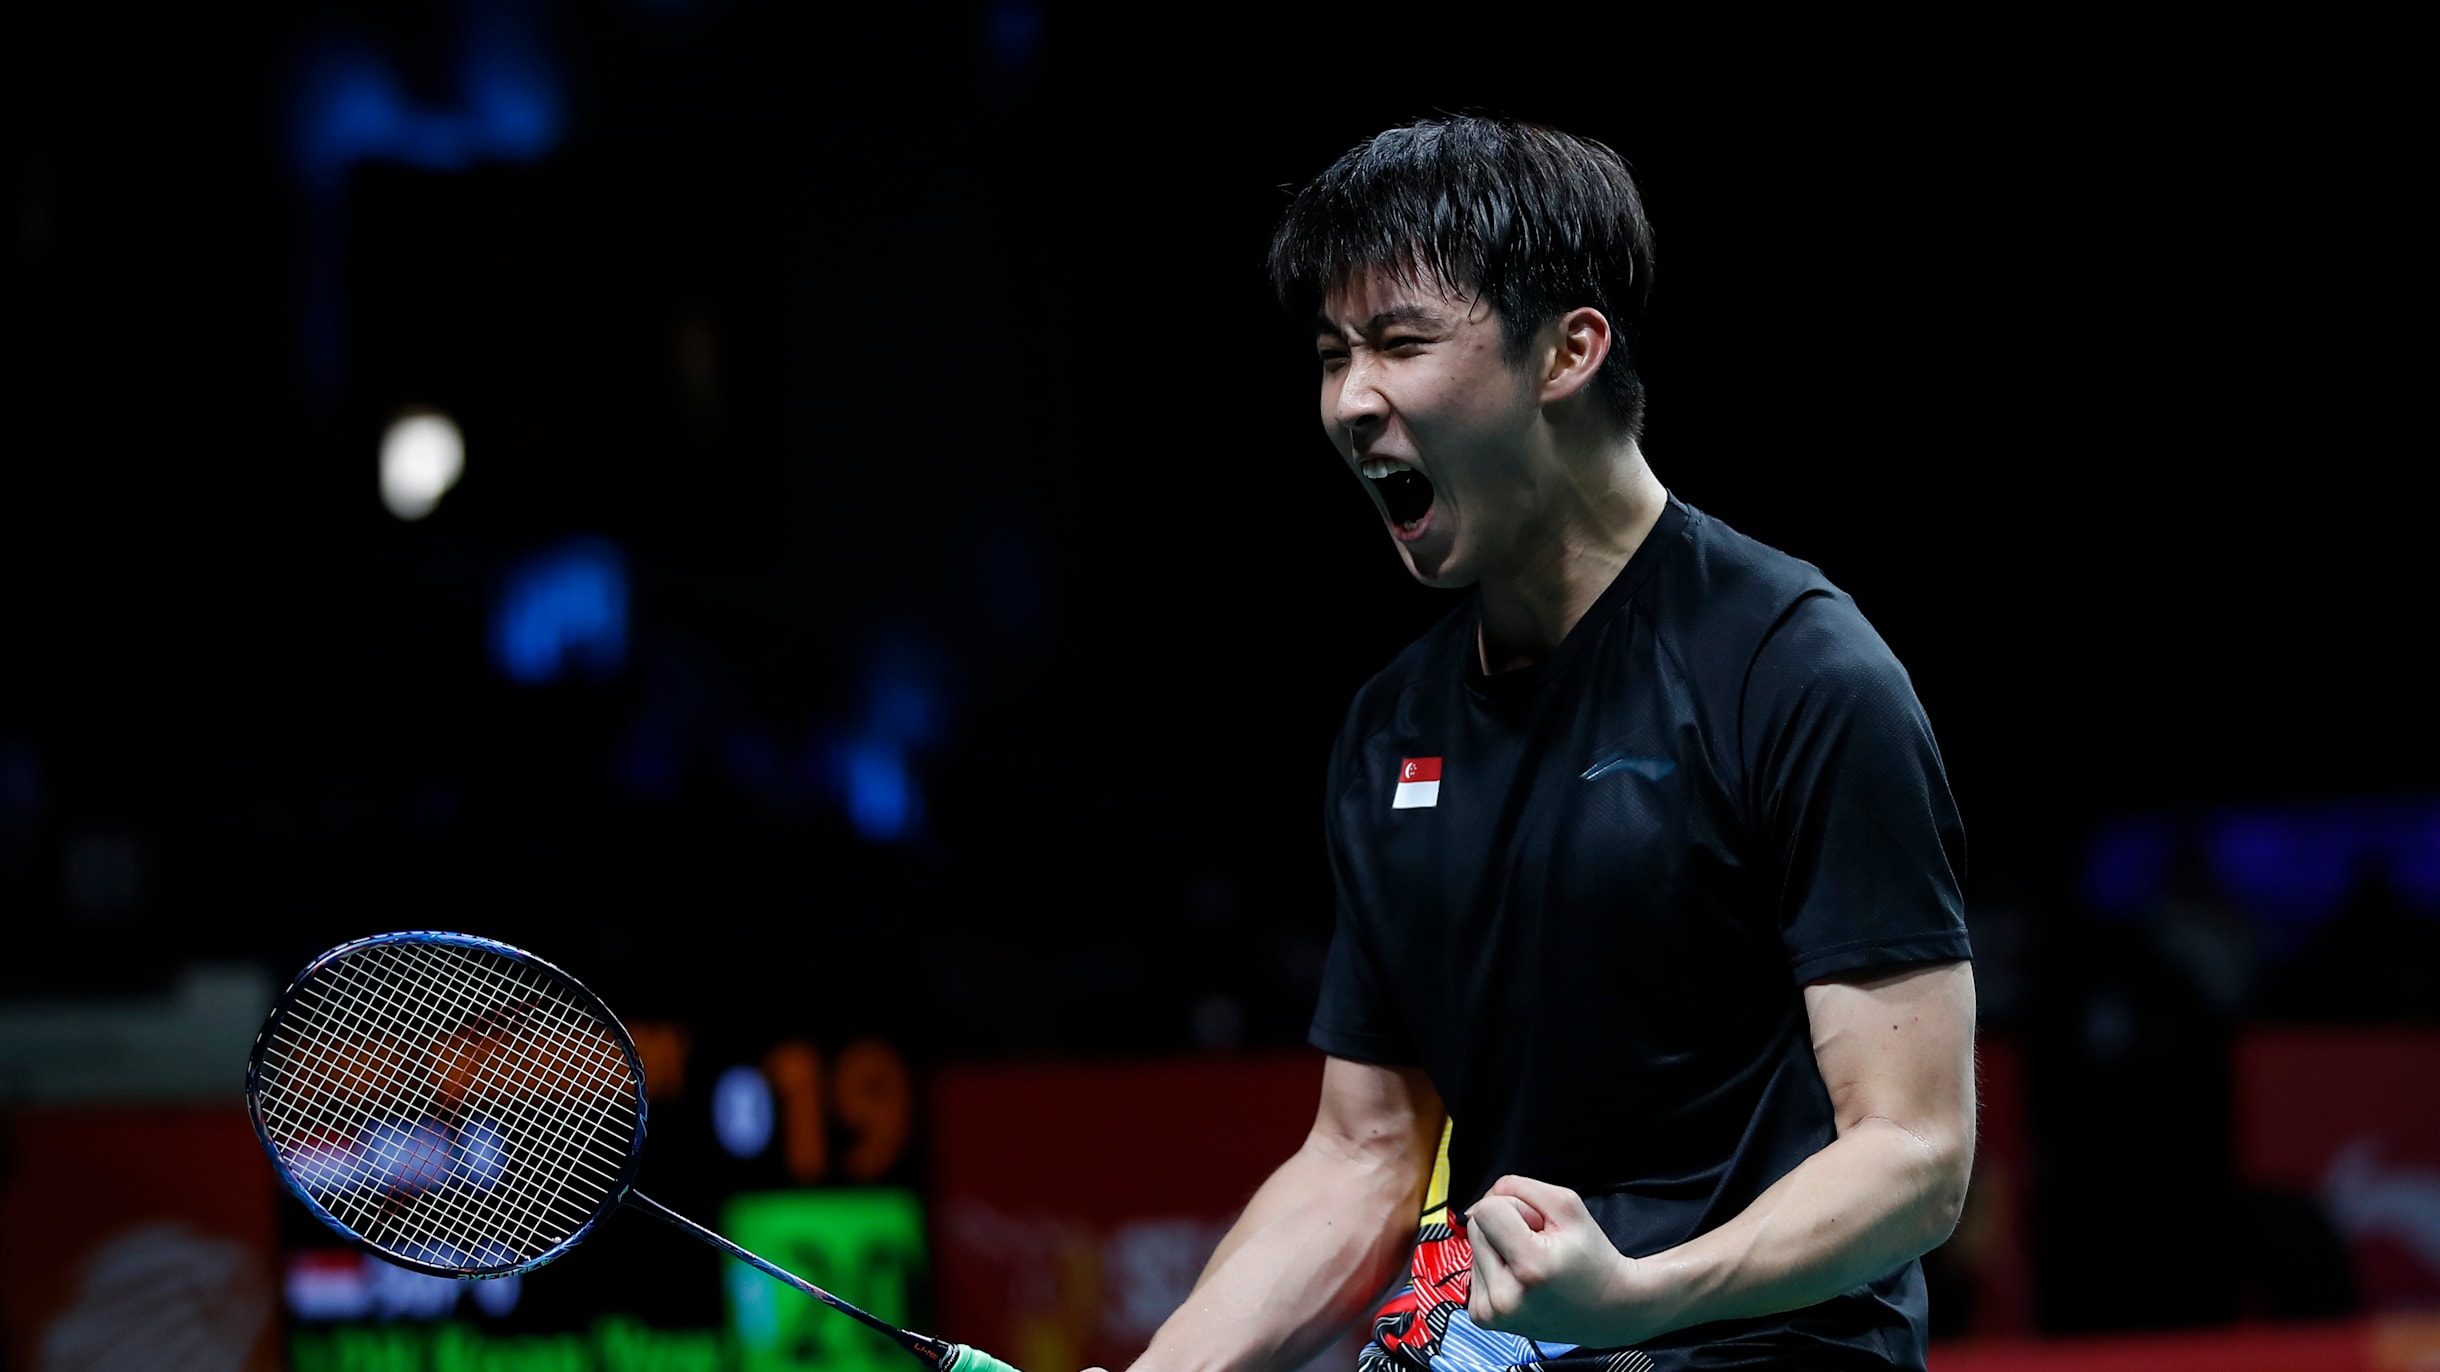 Badminton at SEA Games in 2022 Preview, schedule and stars to watch including Loh Kean Yew and Apriyani Rahayu